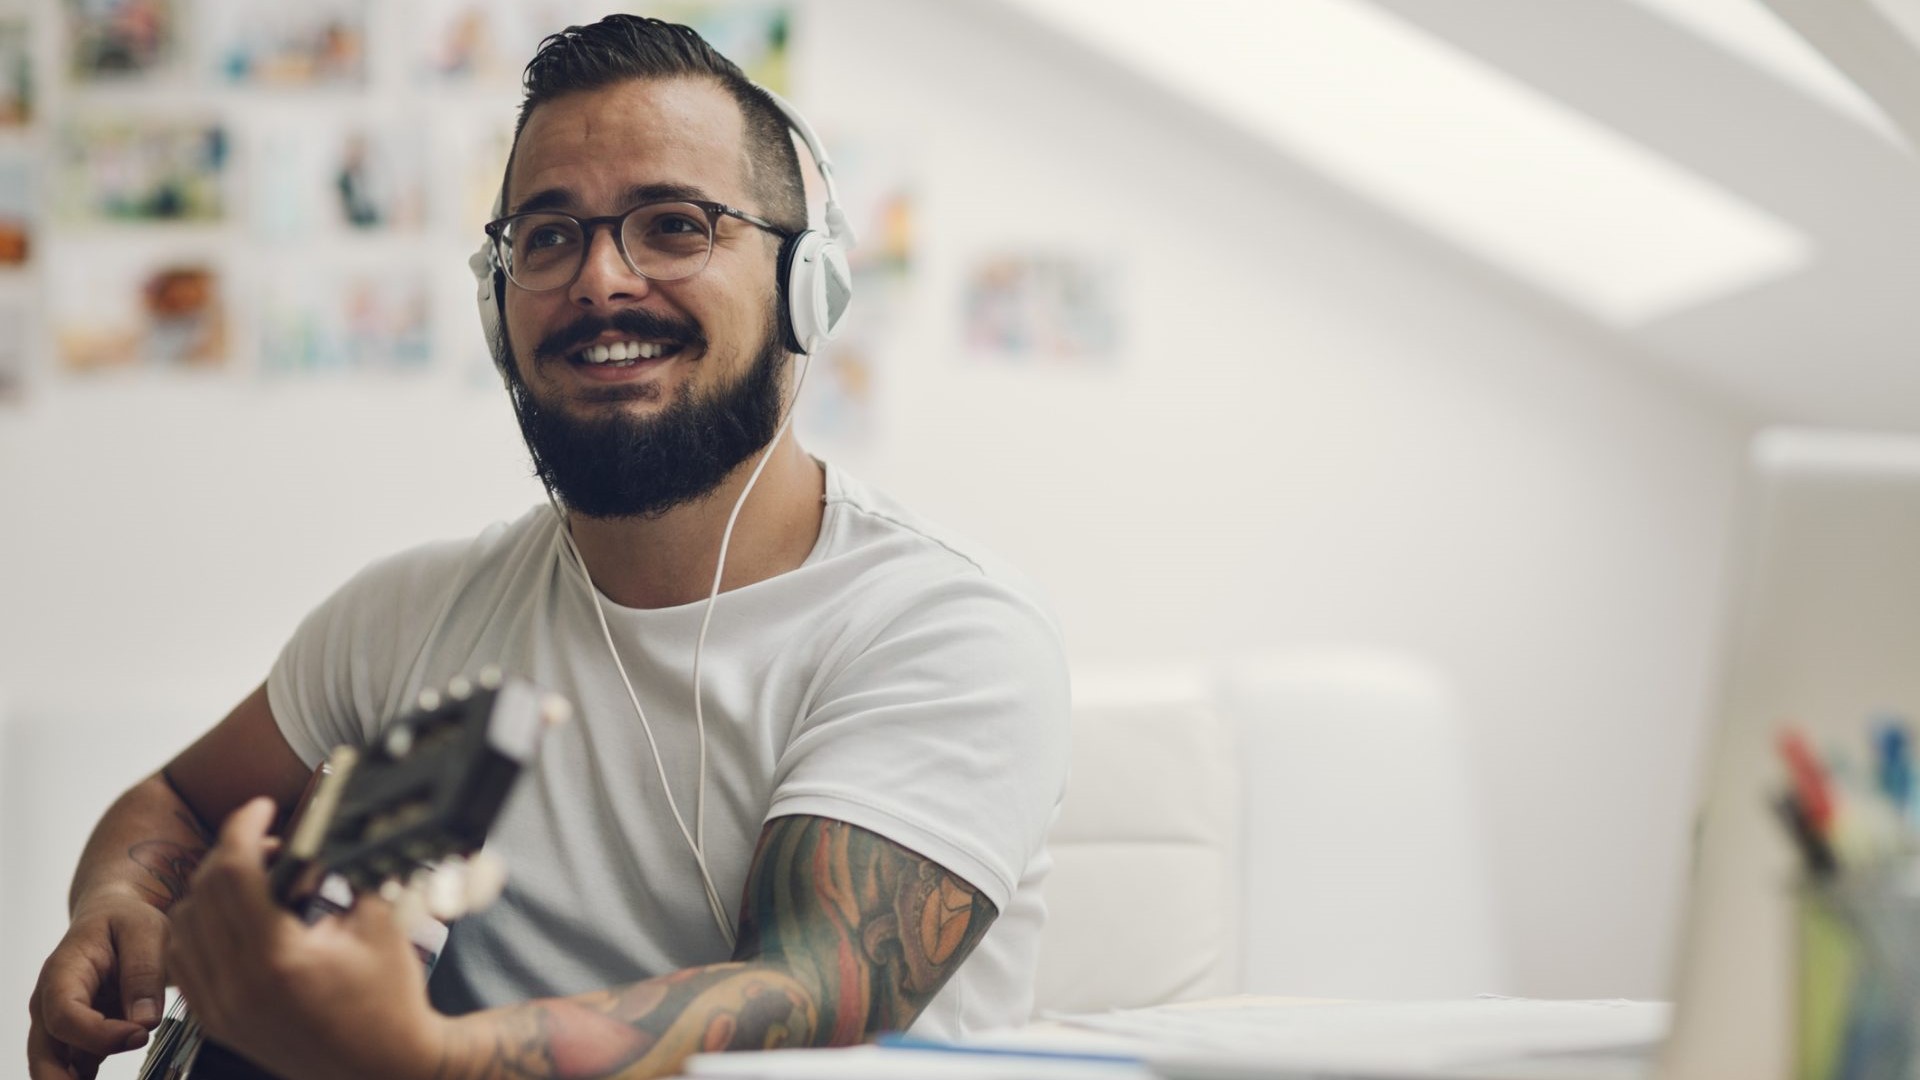 A bearded man smiles while wearing headphones and glasses, he is playing an acoustic guitar